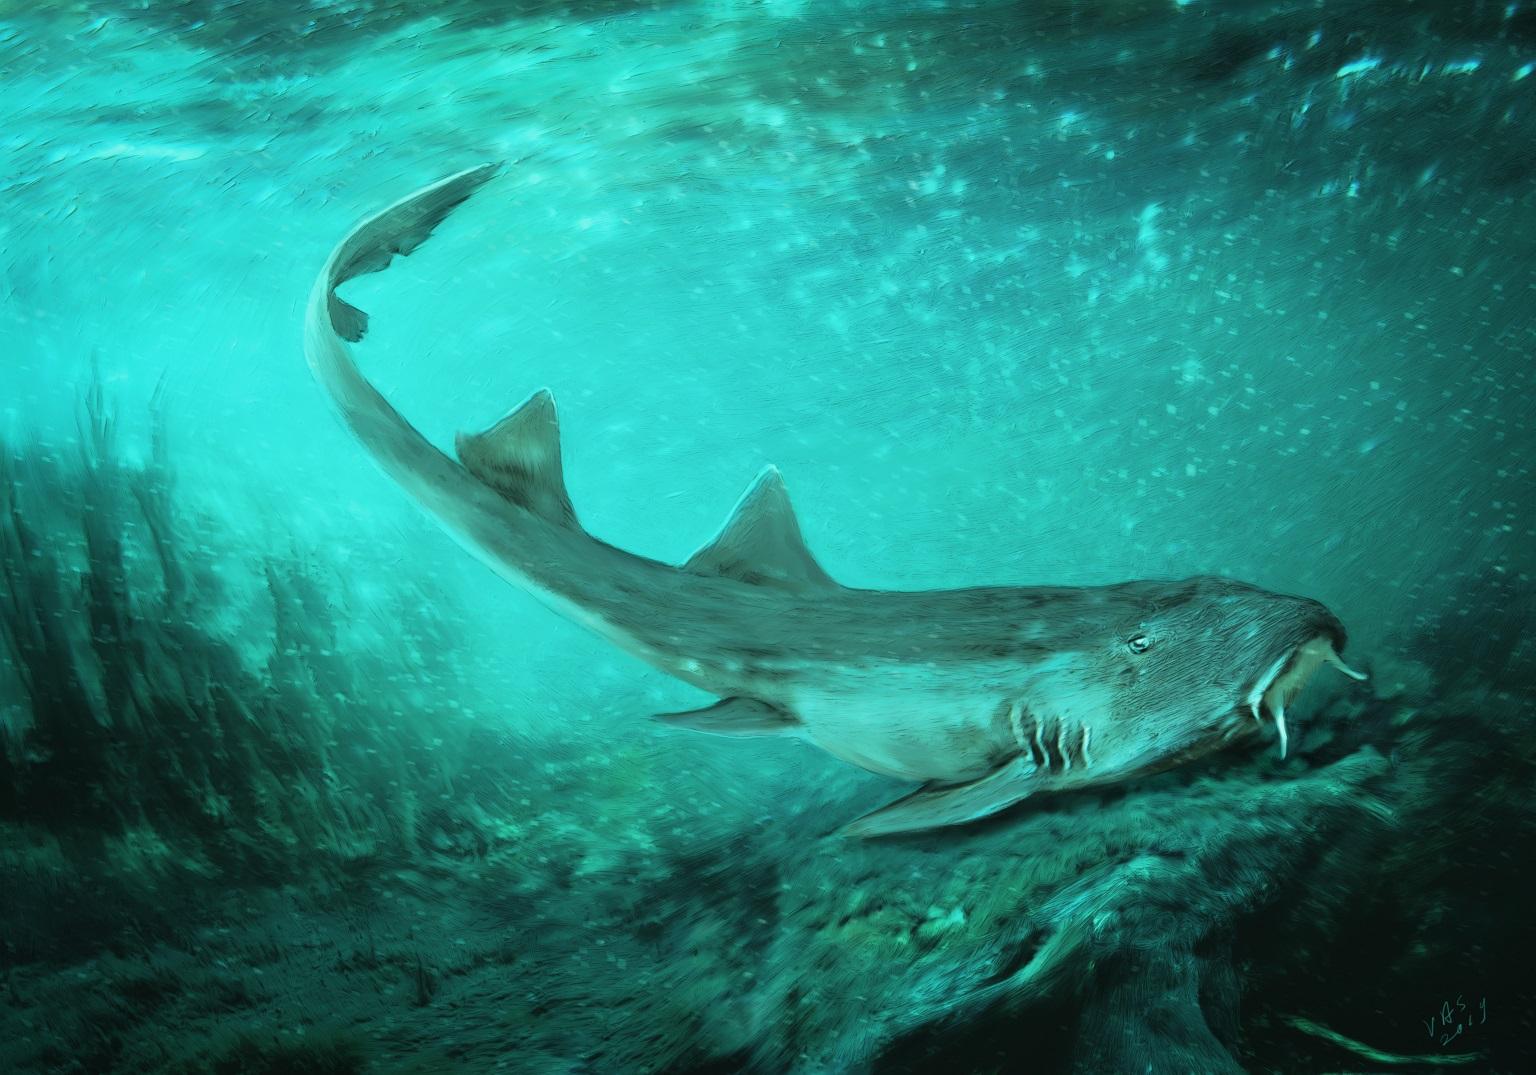 Remains of a freshwater shark with teeth shaped like spaceships from the 1980s video game Galaga was discovered in sediment surrounding Sue the T. Rex’s bones. (Velizar Simeonovski / Field Museum)